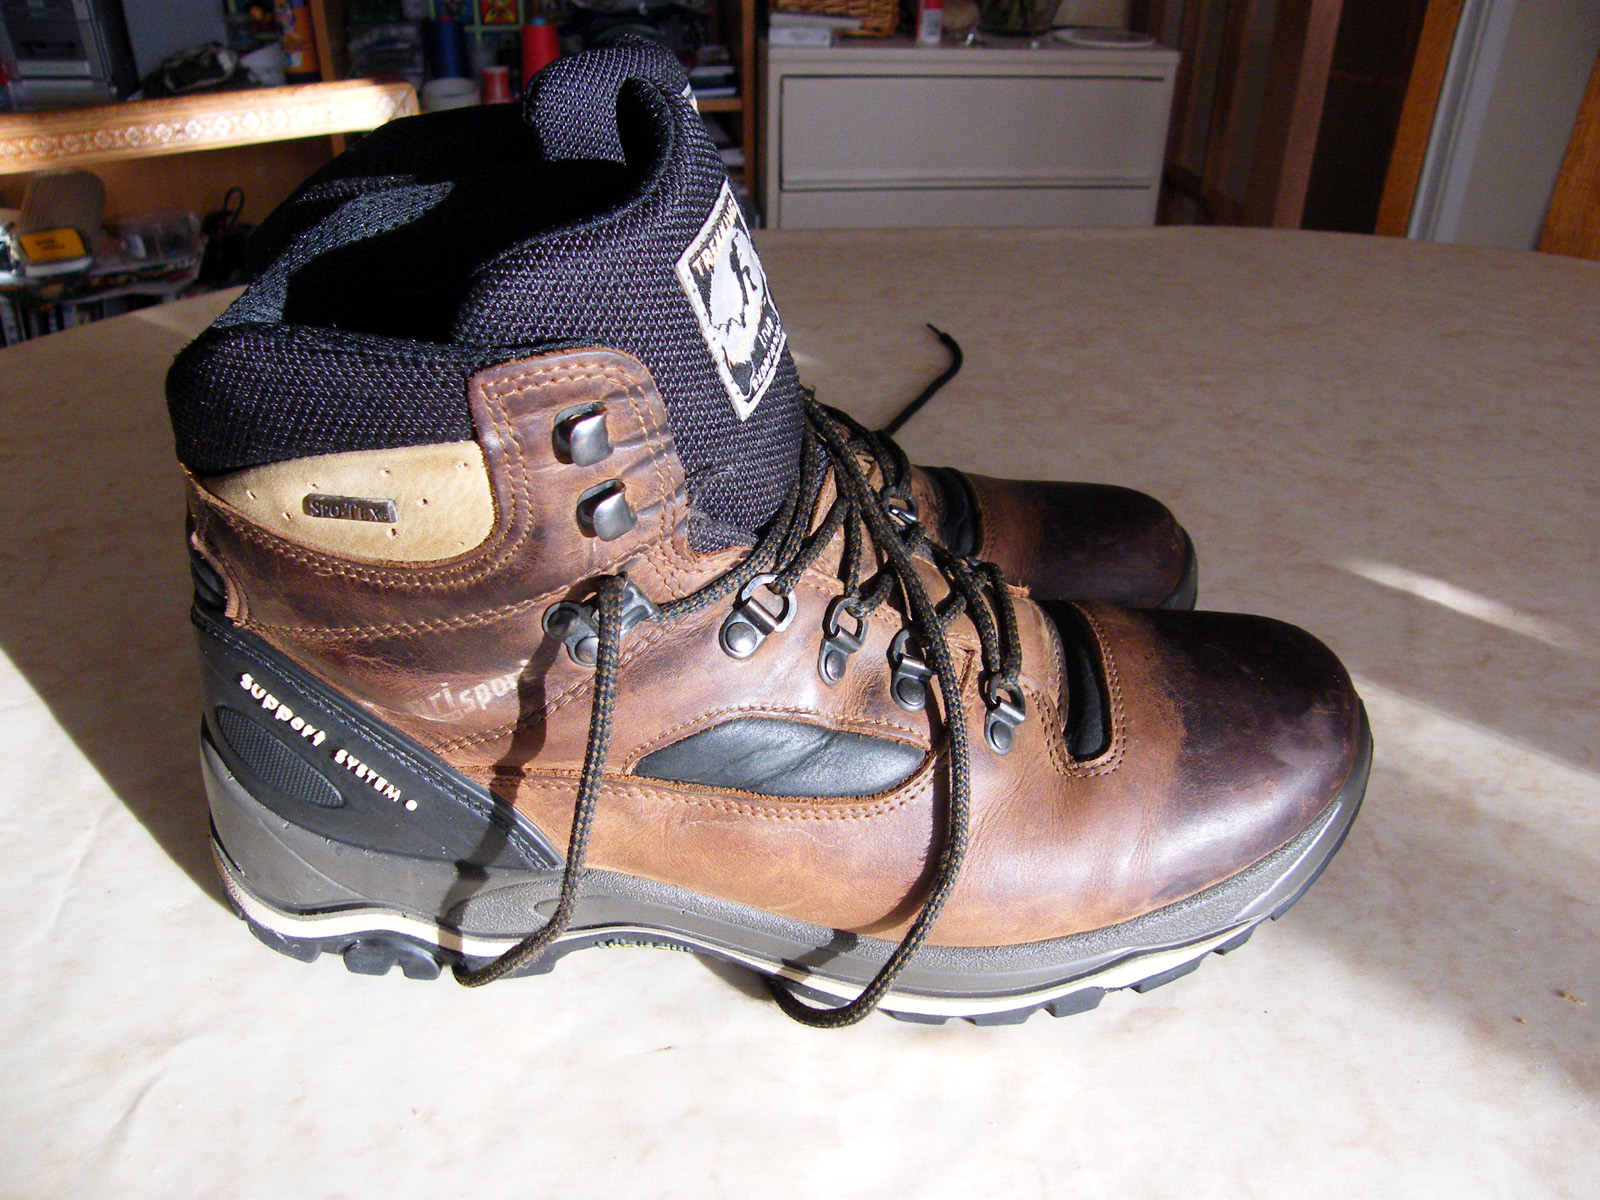 Gear Review – Grisport Quatro Boots – Walking in the Wilds of Scotland